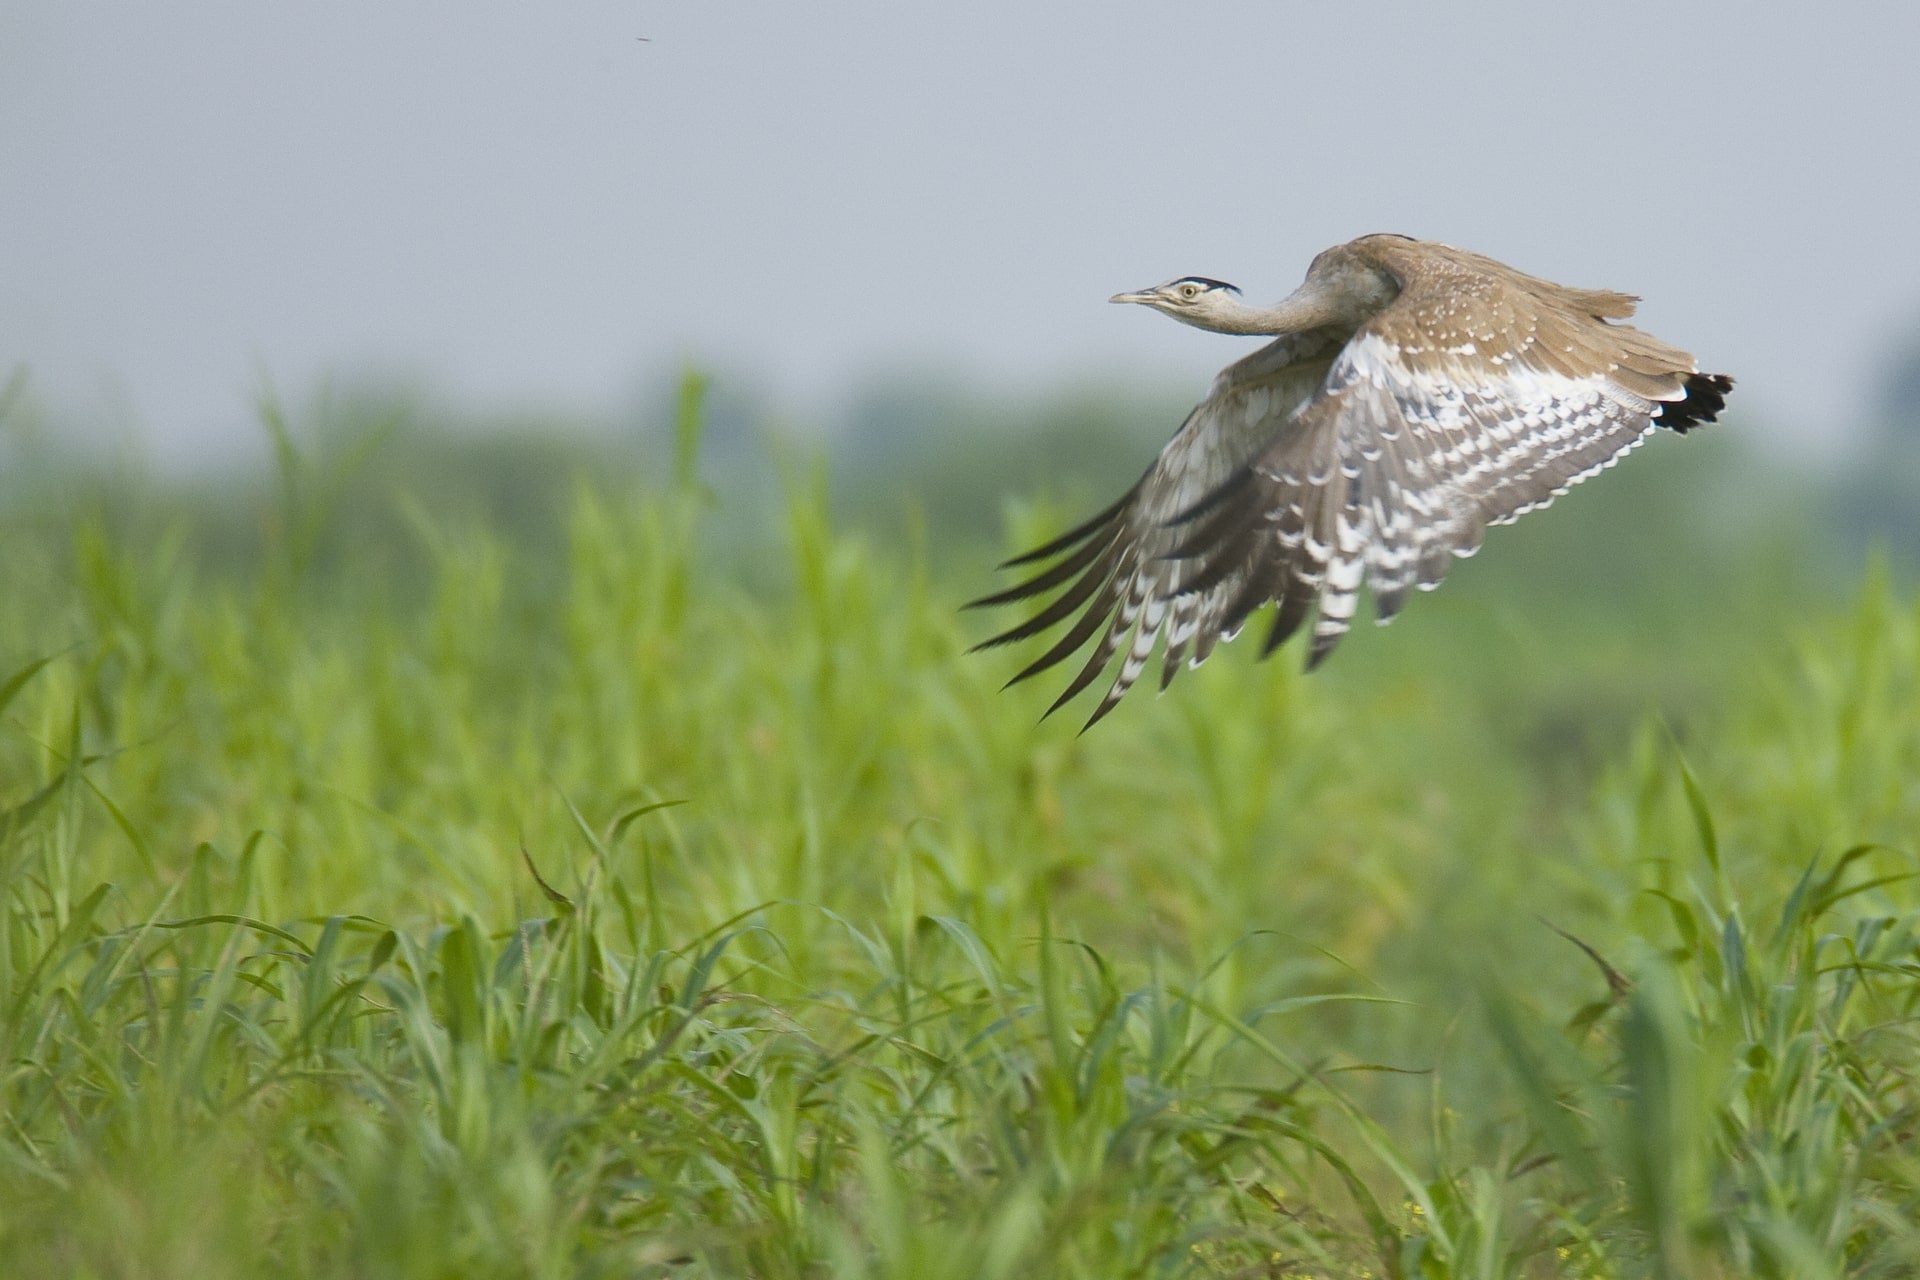 When migrating, houbaras can cover many hundreds of kilometres in a few days, travelling at steady speeds mainly by night